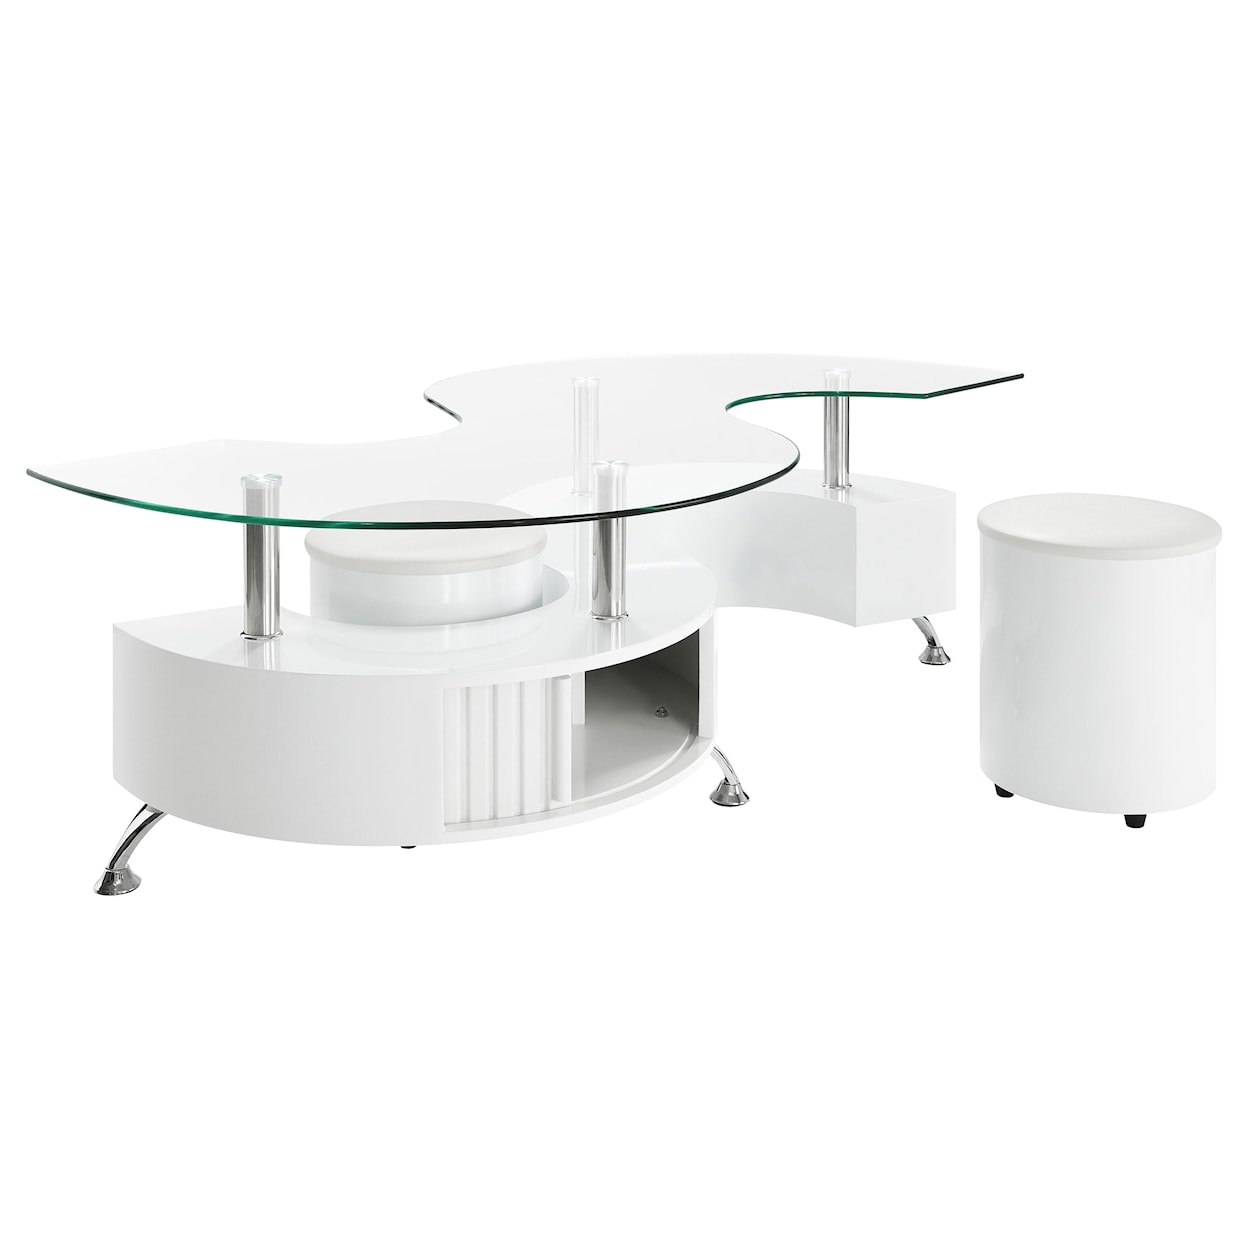 Coaster S Shaped Coffee Table WHITE S SHAPED COFFEE TABLE WITH 2. | STOOLS